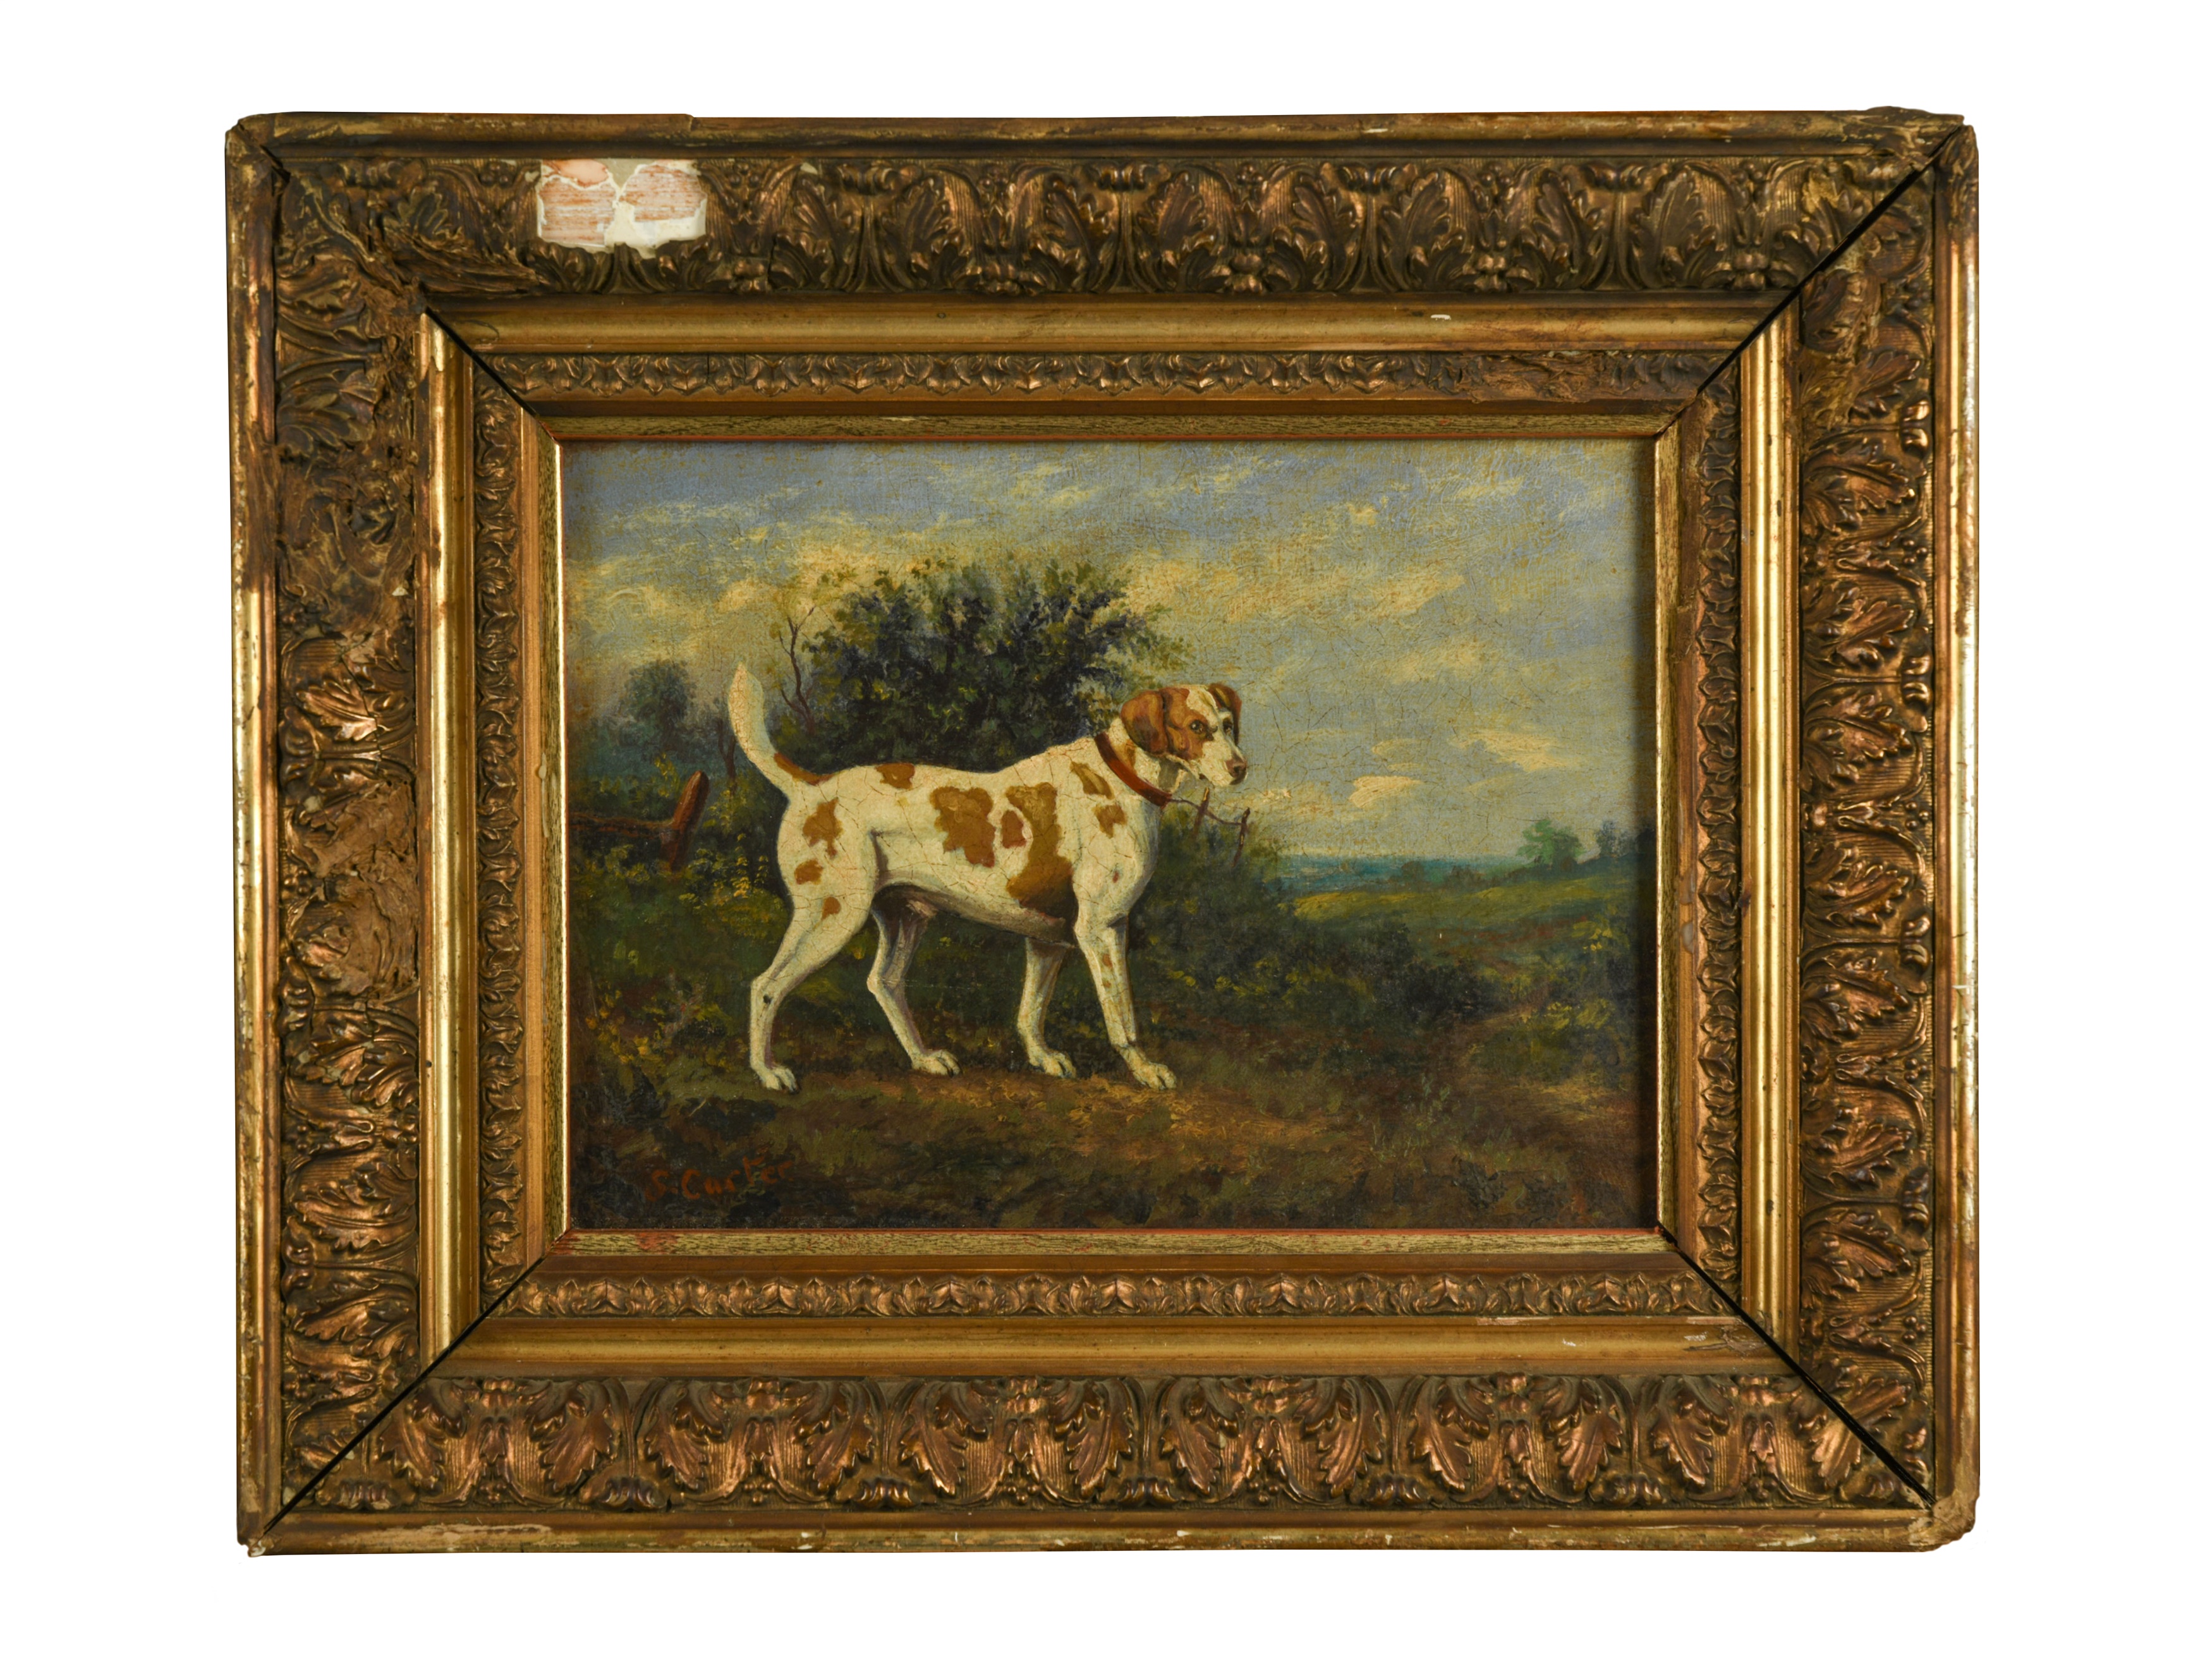 Attributed to Samuel John Carter (British, 1835-1892) Study of a pointer in a landscape